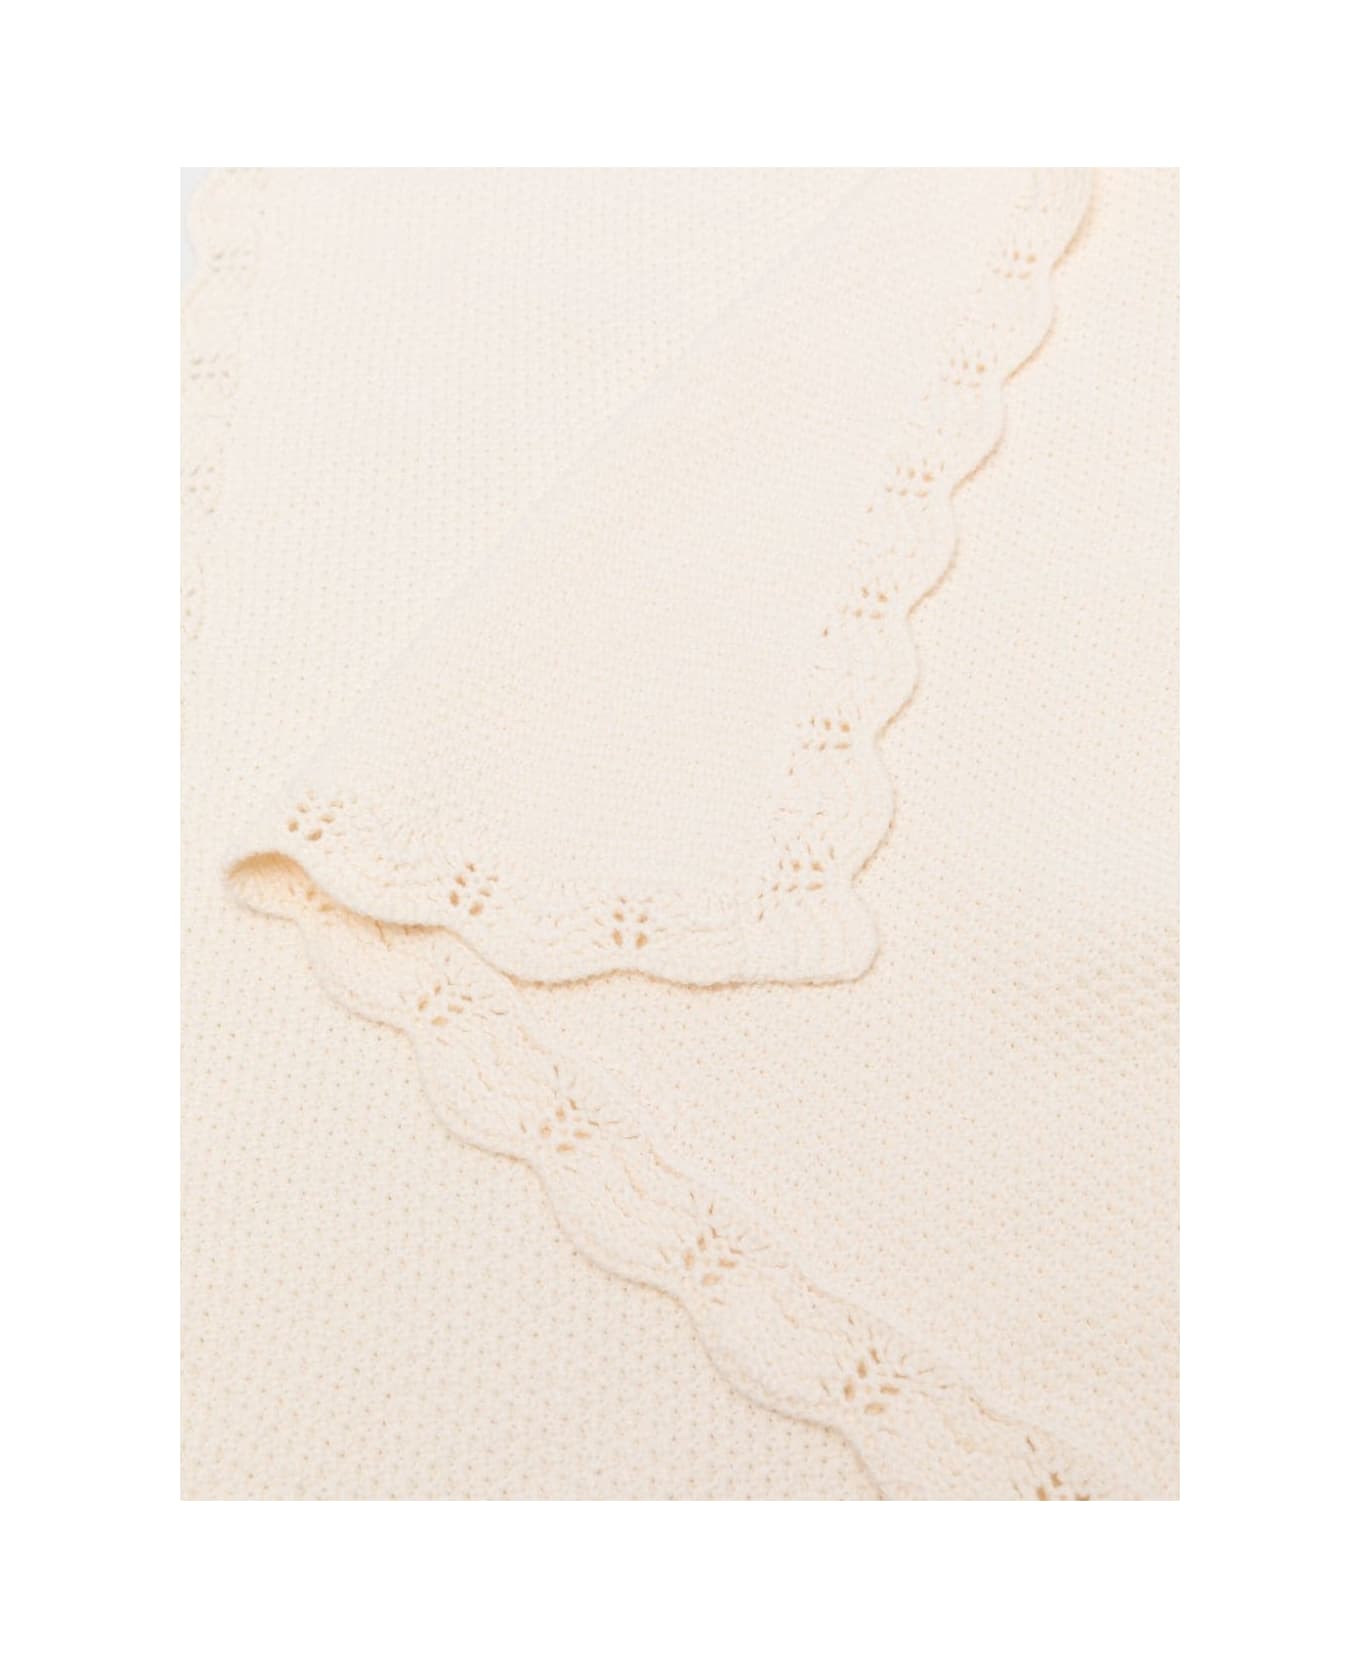 Chloé Blanket With Embroidery - Cream